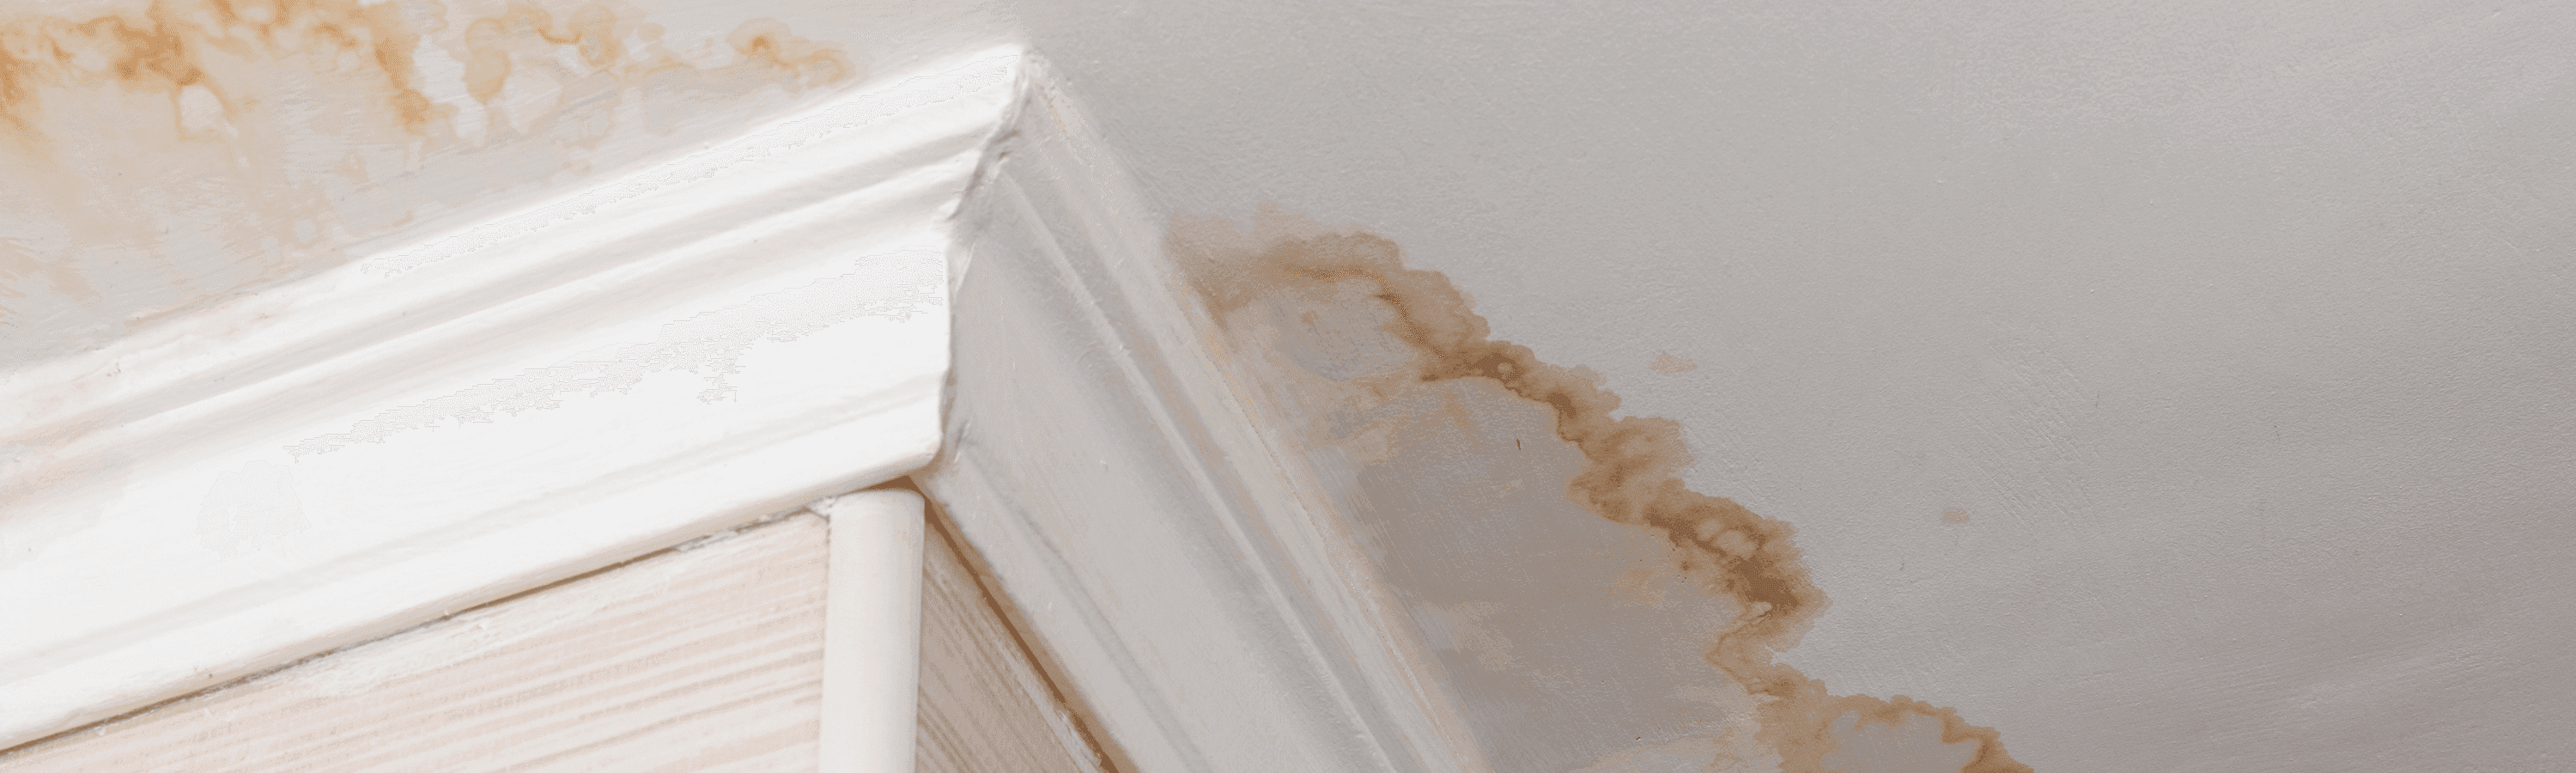 How to Spot Signs of Water Damage in Your Home